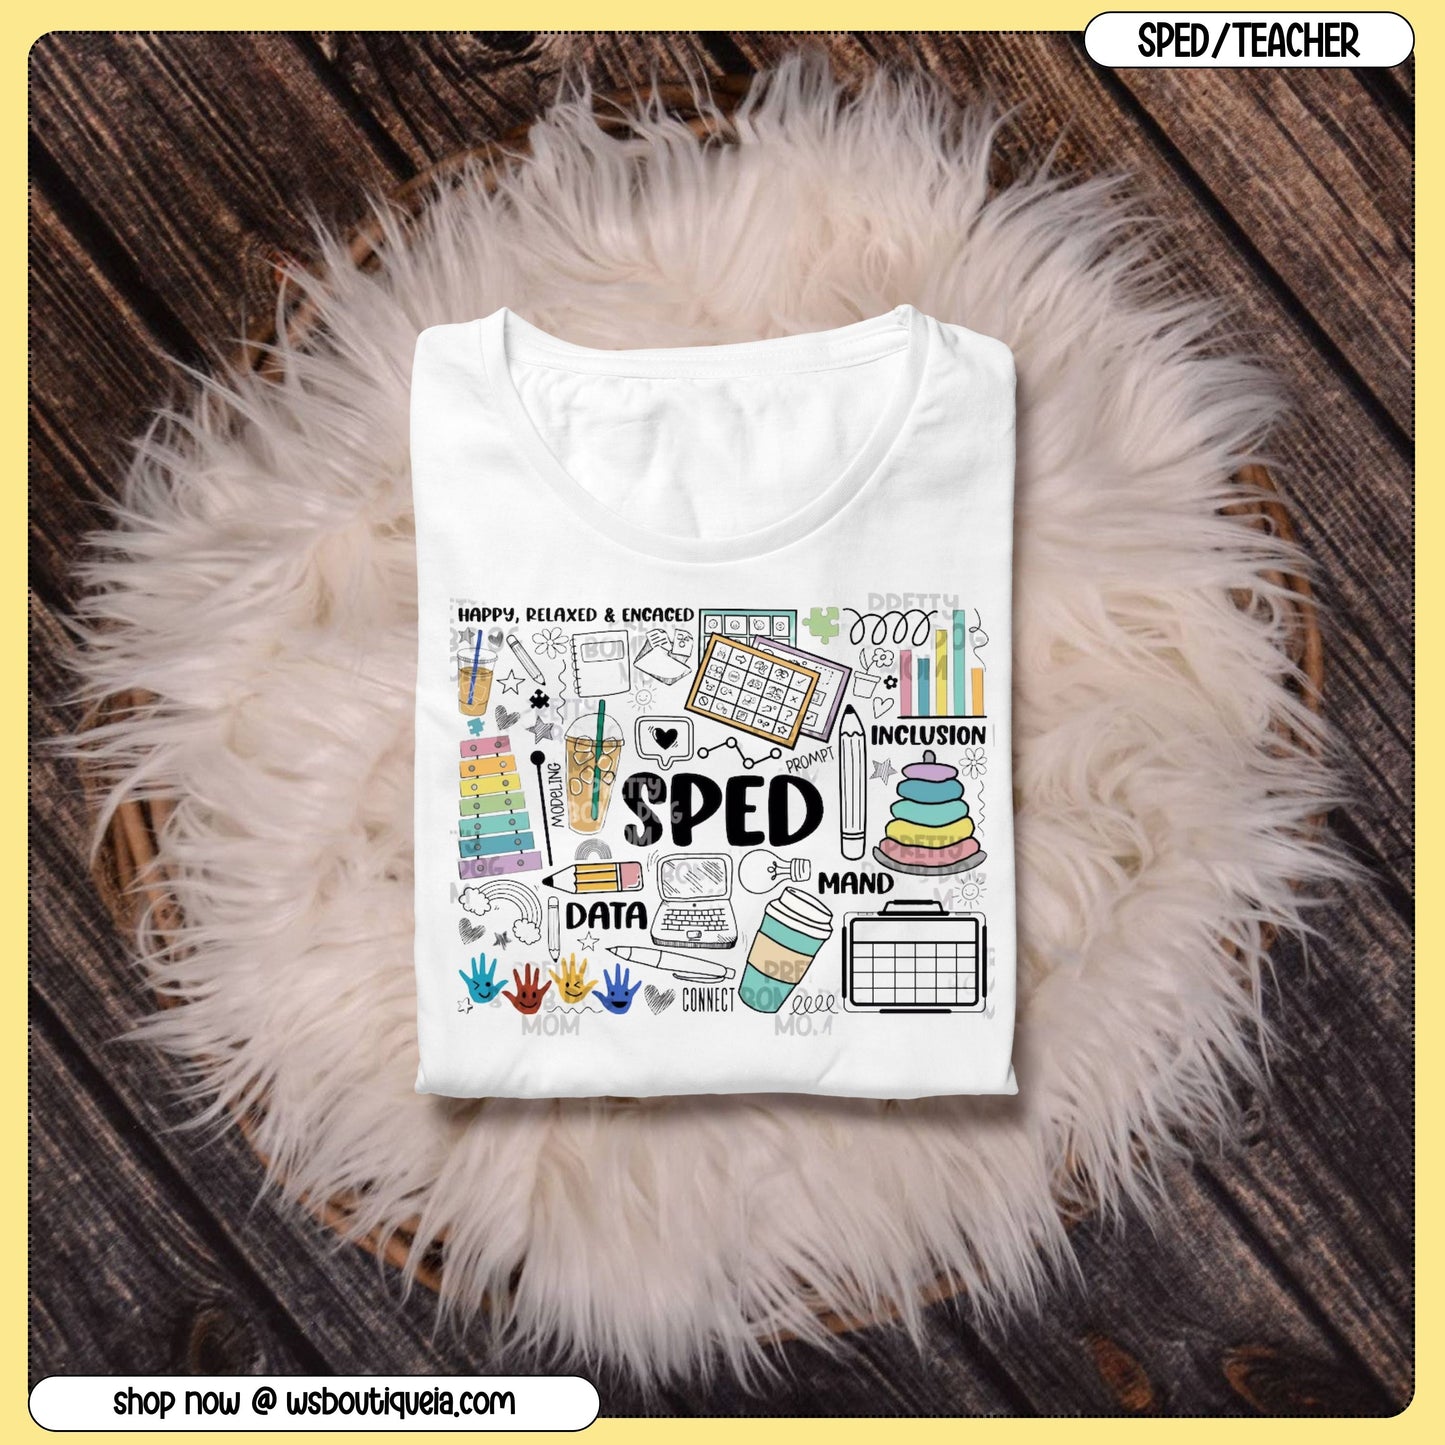 SPED Collage Special Education Tee/Sweatshirt